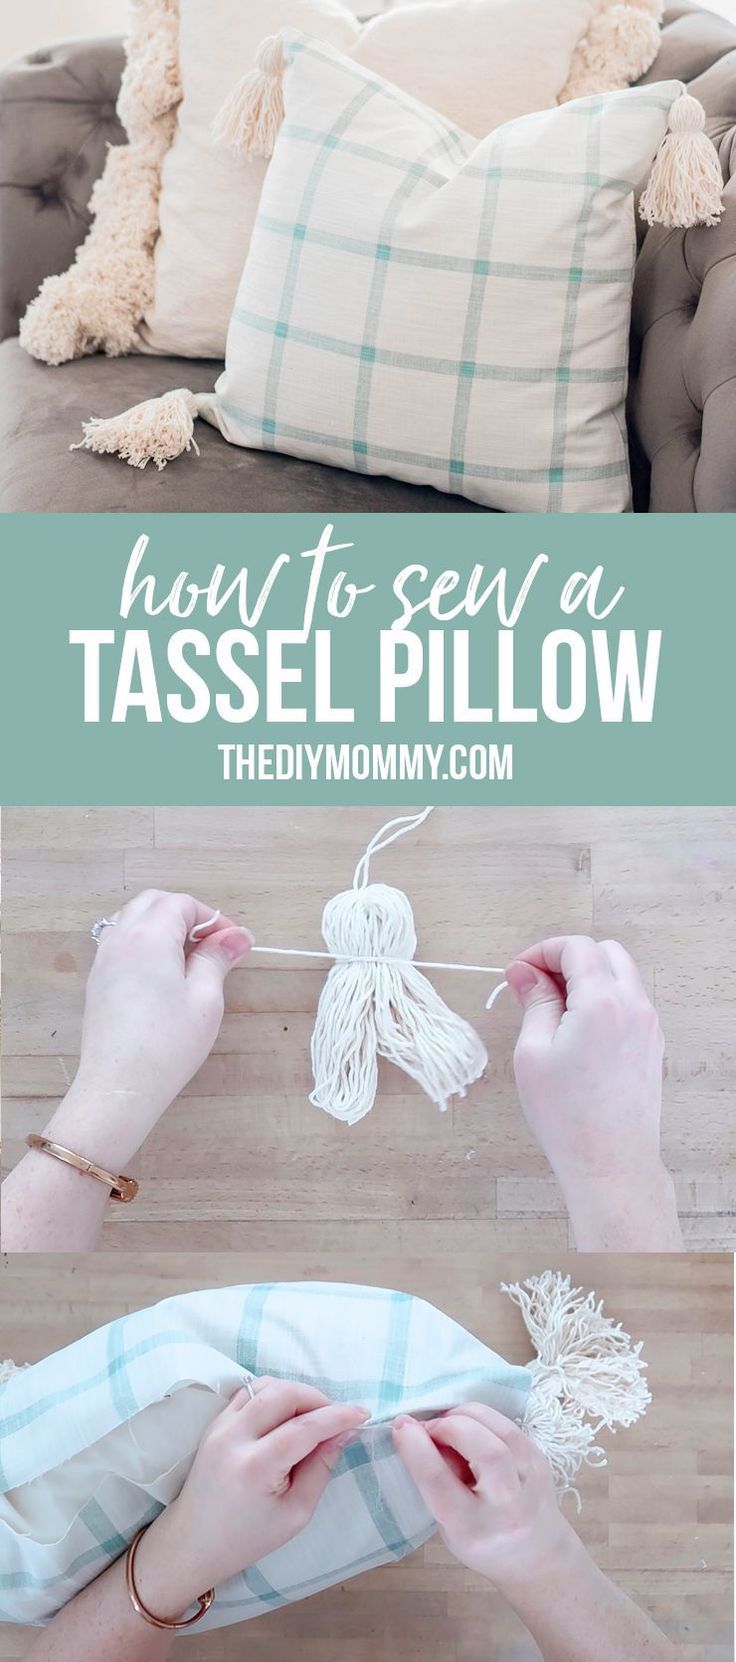 Sew a Tassel Pillow Cover | The DIY Mommy - Sew a Tassel Pillow Cover | The DIY Mommy -   17 diy Pillows decorative ideas